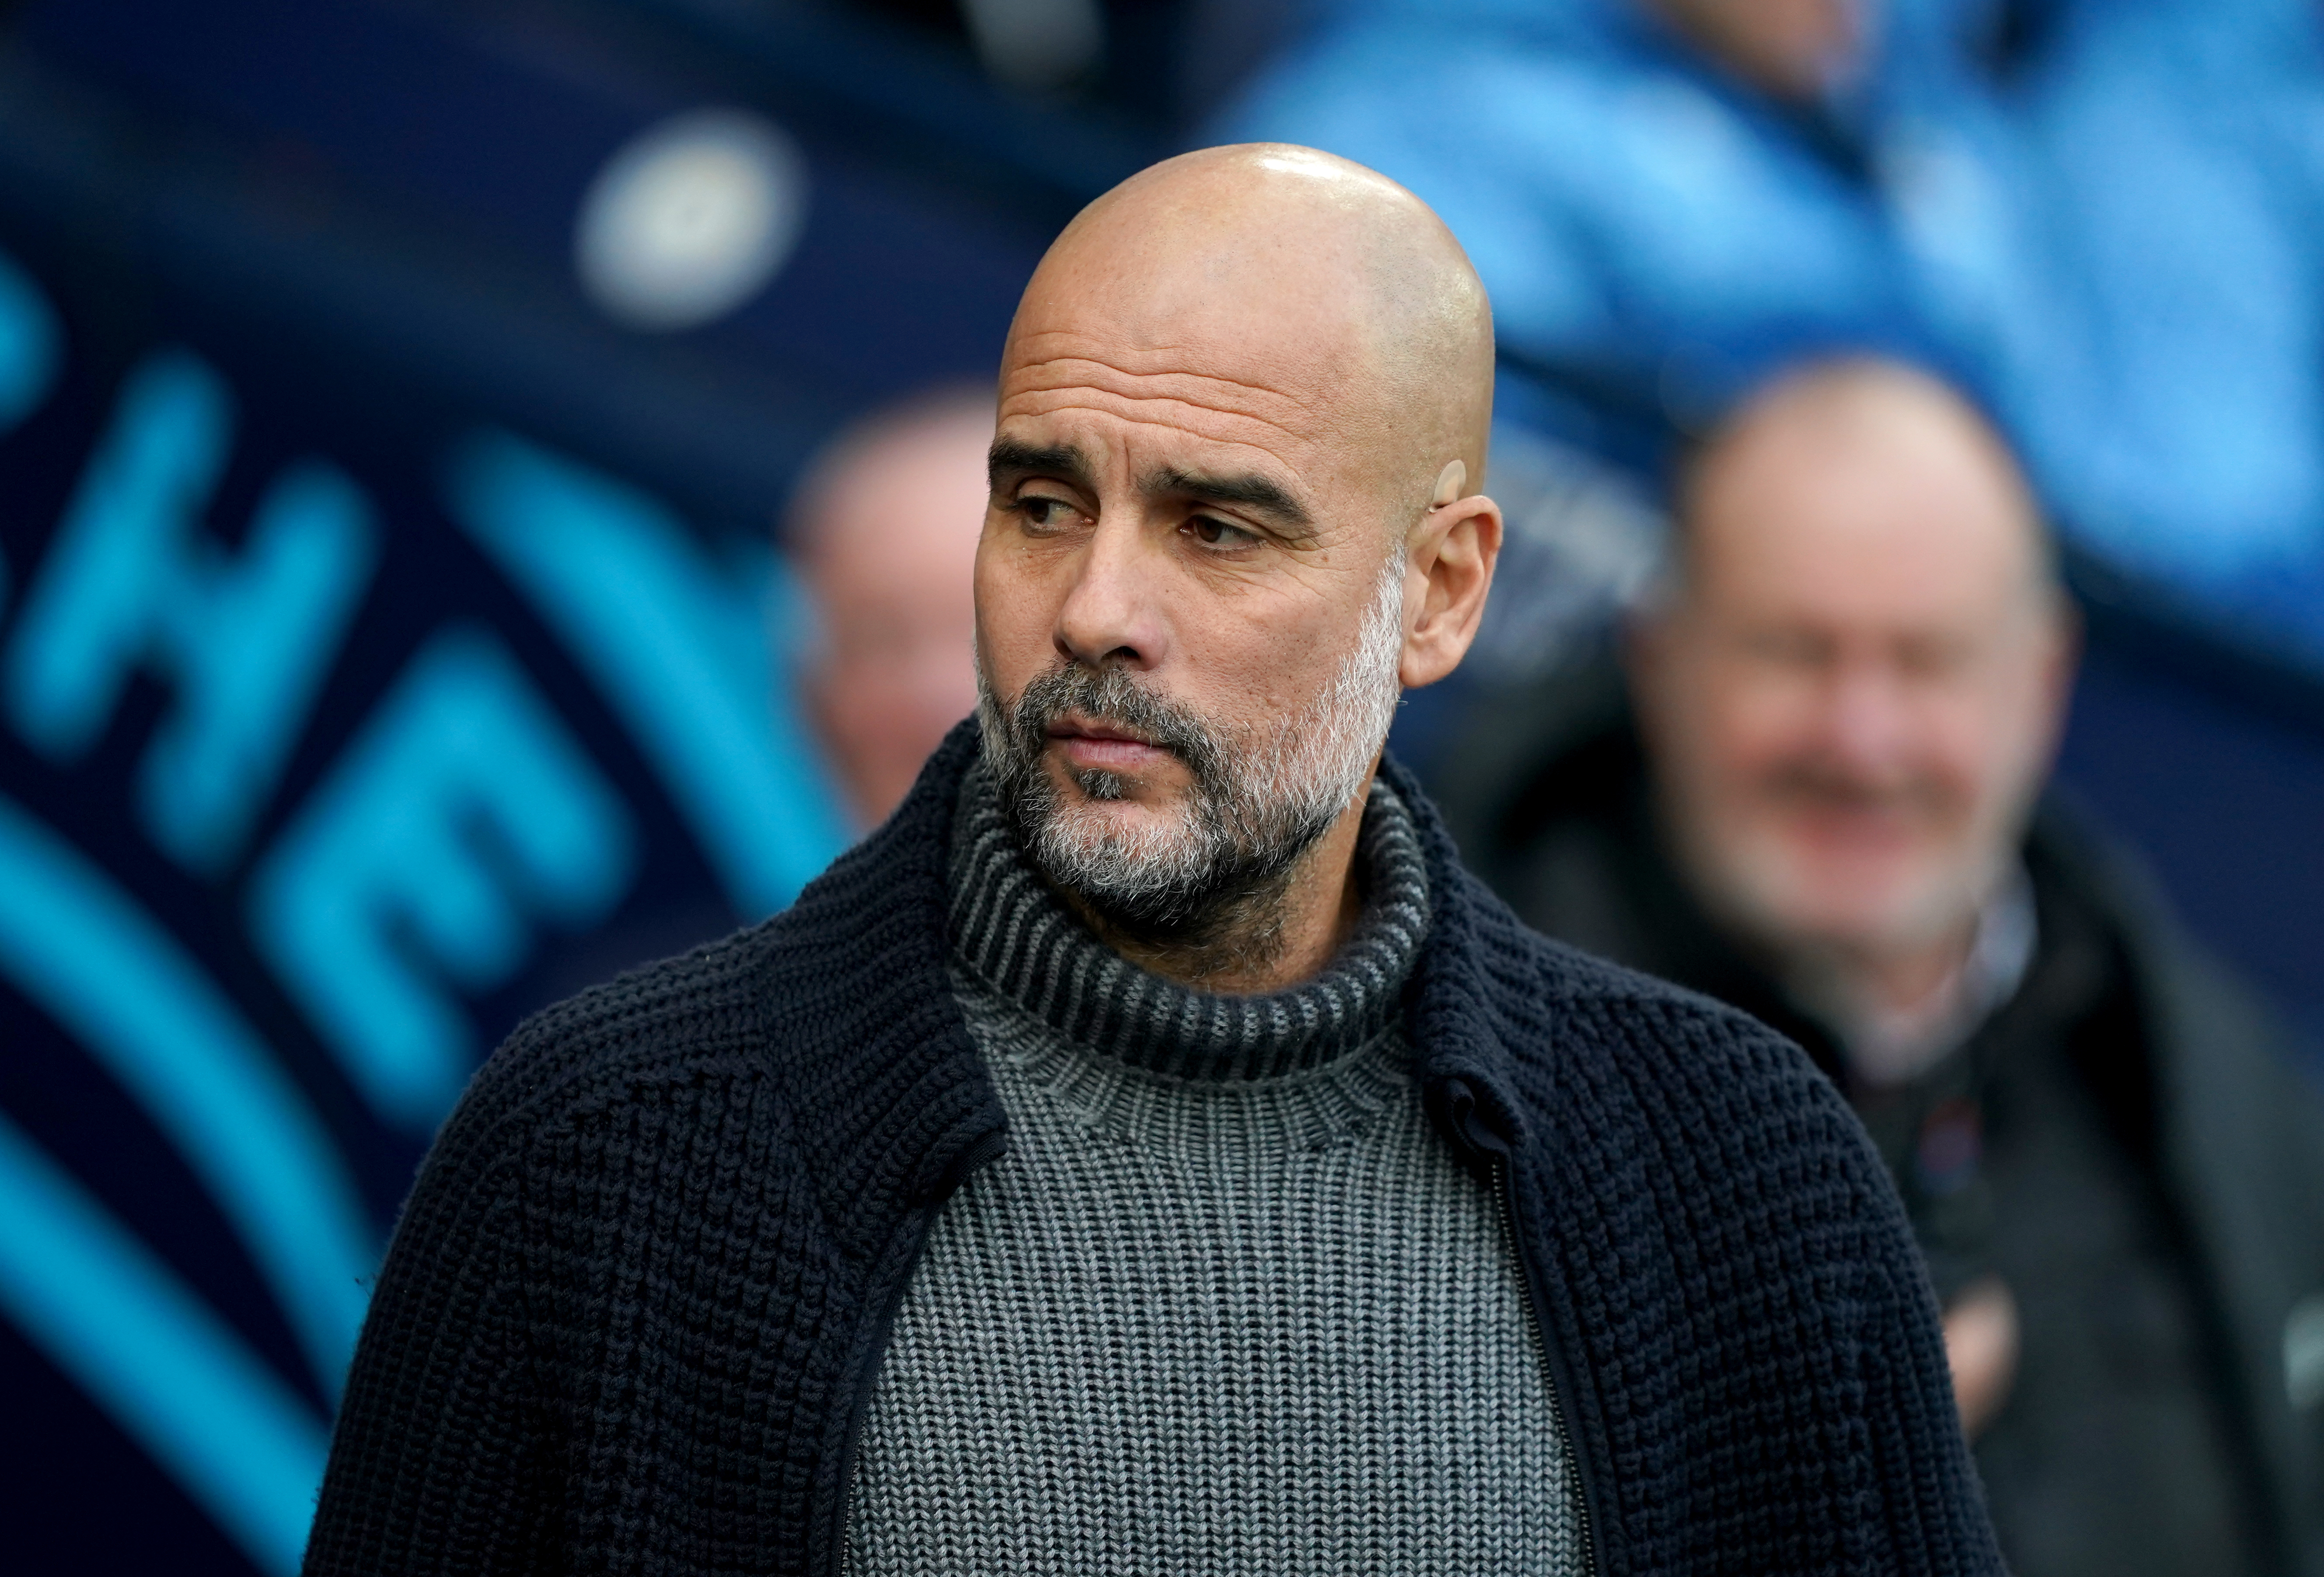 Pep Guardiola's Manchester City are already assured of a place in the extended Club World Cup